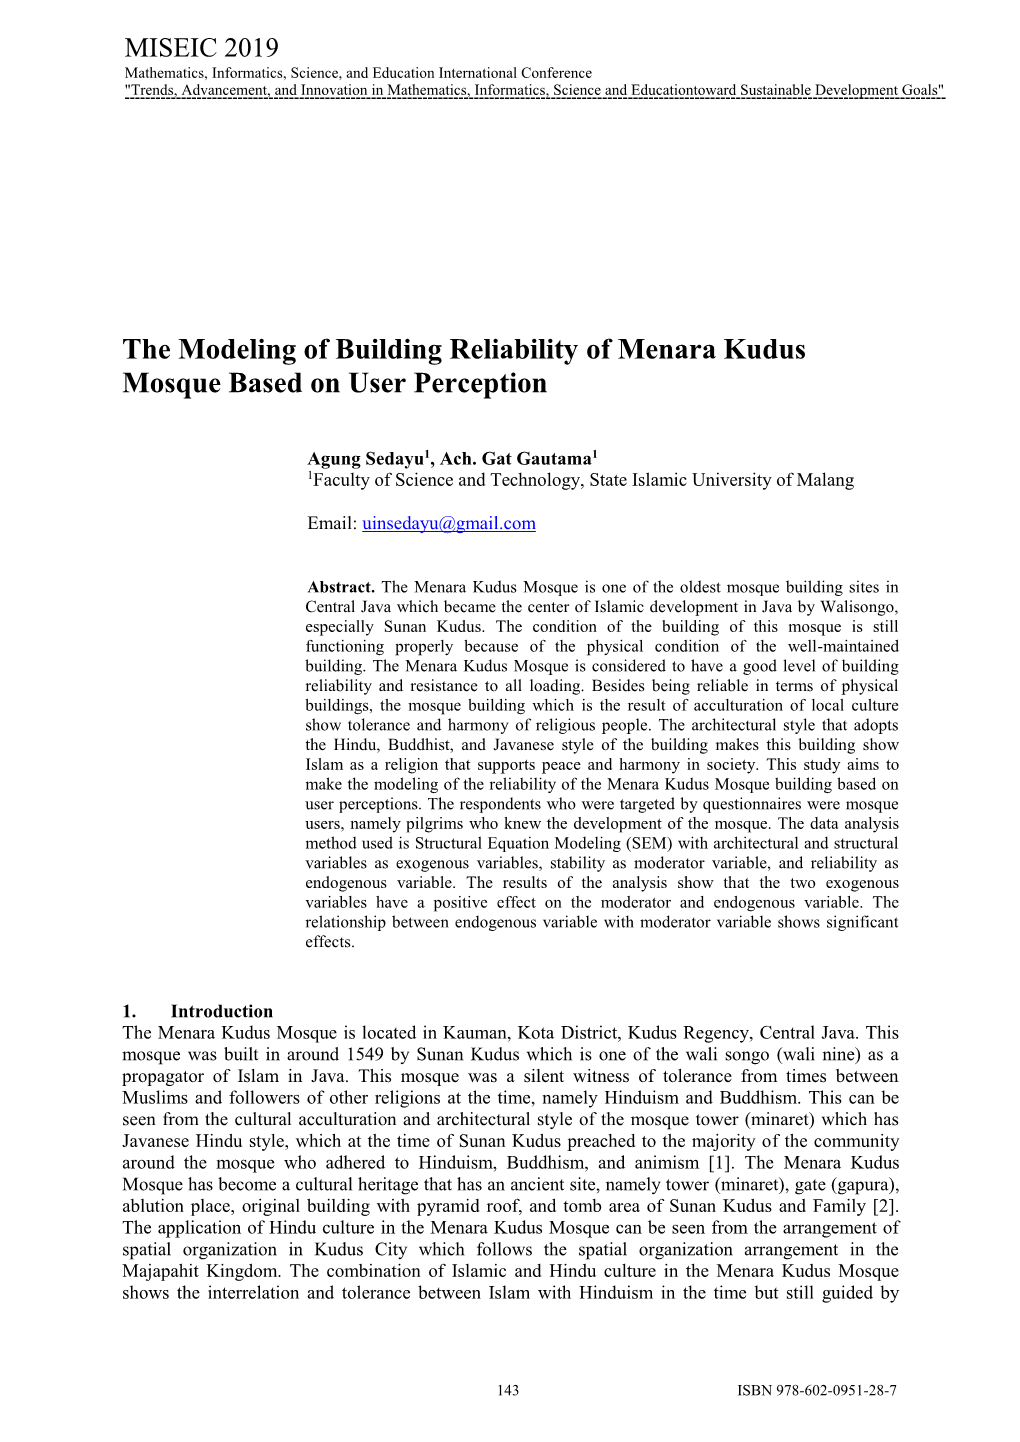 The Modeling of Building Reliability of Menara Kudus Mosque Based on User Perception